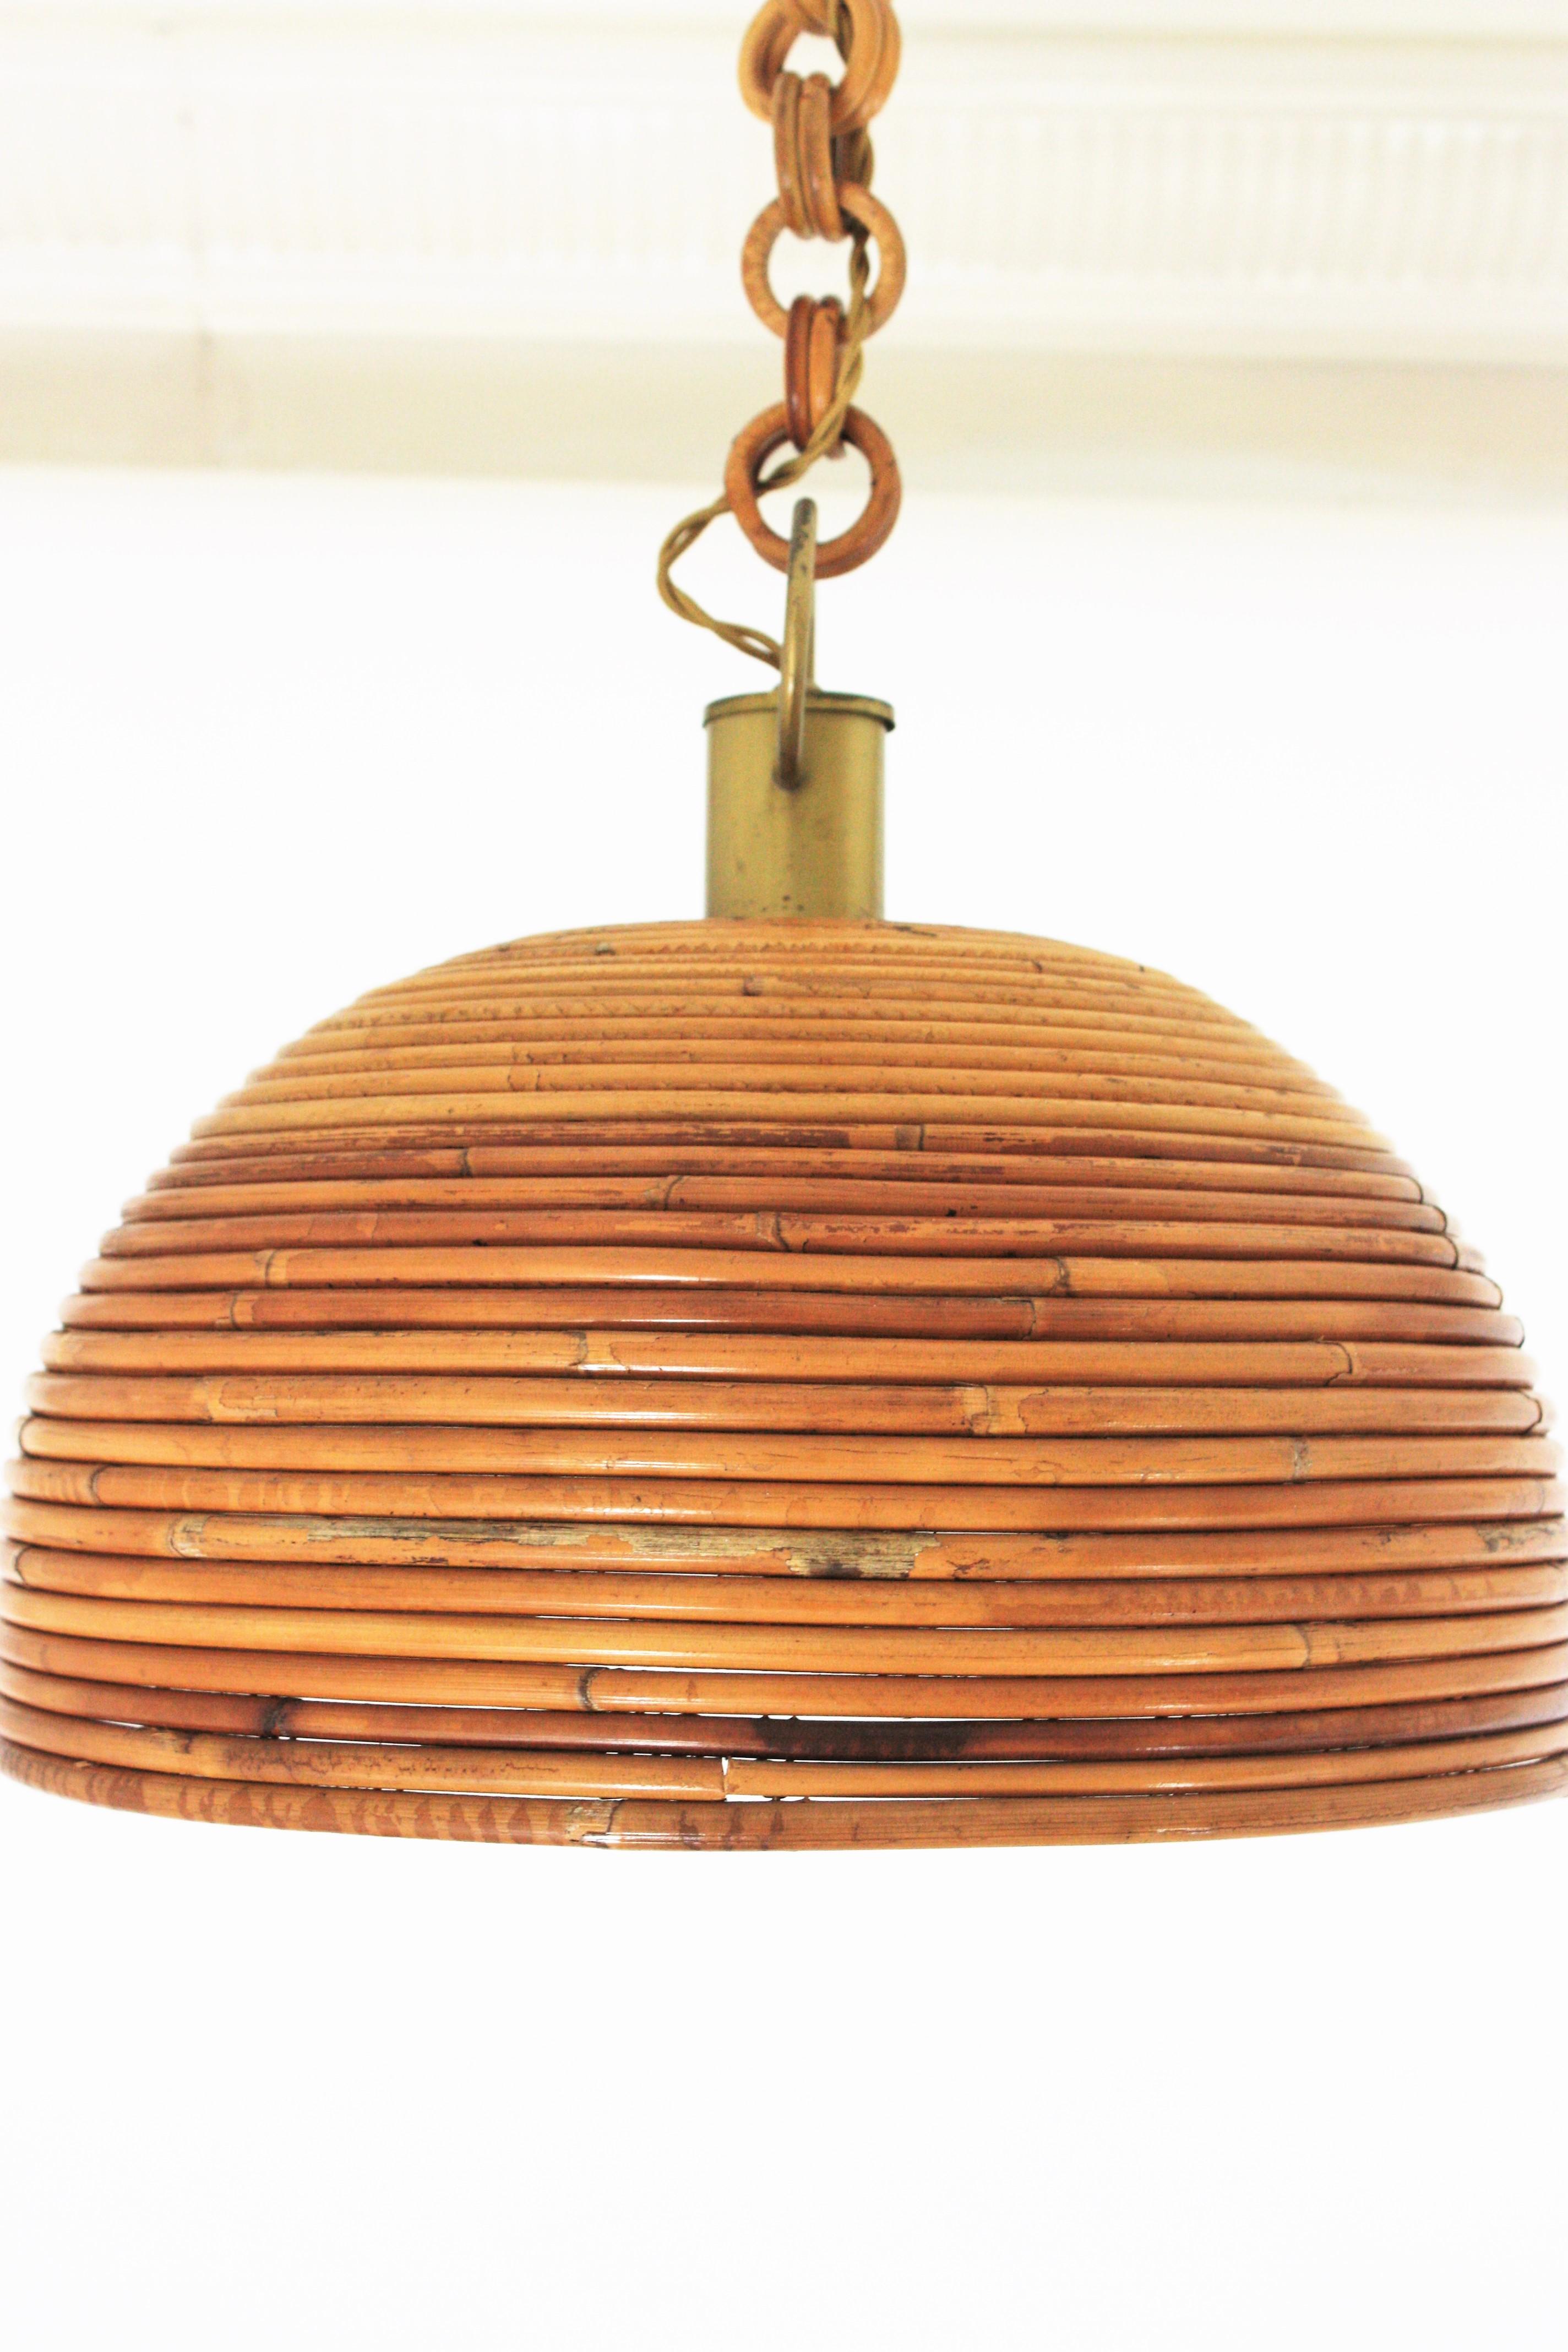 Hand-Crafted Vivai del Sud Pencil Reed Rattan Dome Pendant Light, 1960s For Sale